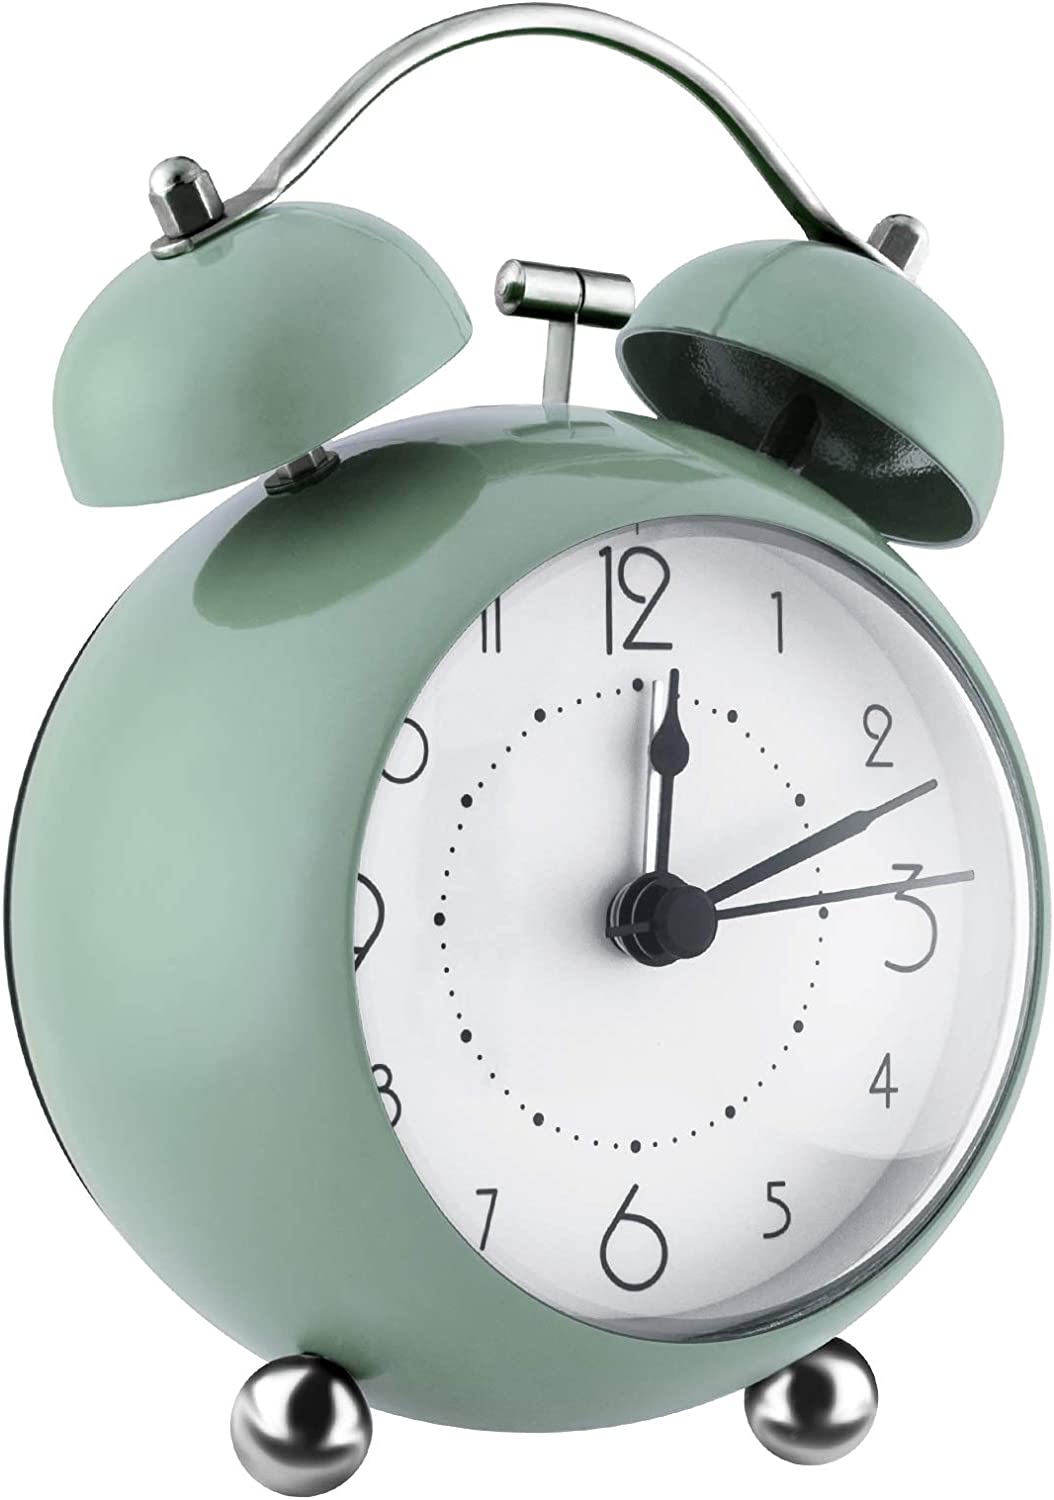 ZOJI Retro Twin Bells Bedside Alarm Clock, Non-Ticking 3.34-Inch Round Convex Mini Clock with Nightlight, Large Digital Display Clock for Bedroom, Office, or Travel, Green 2